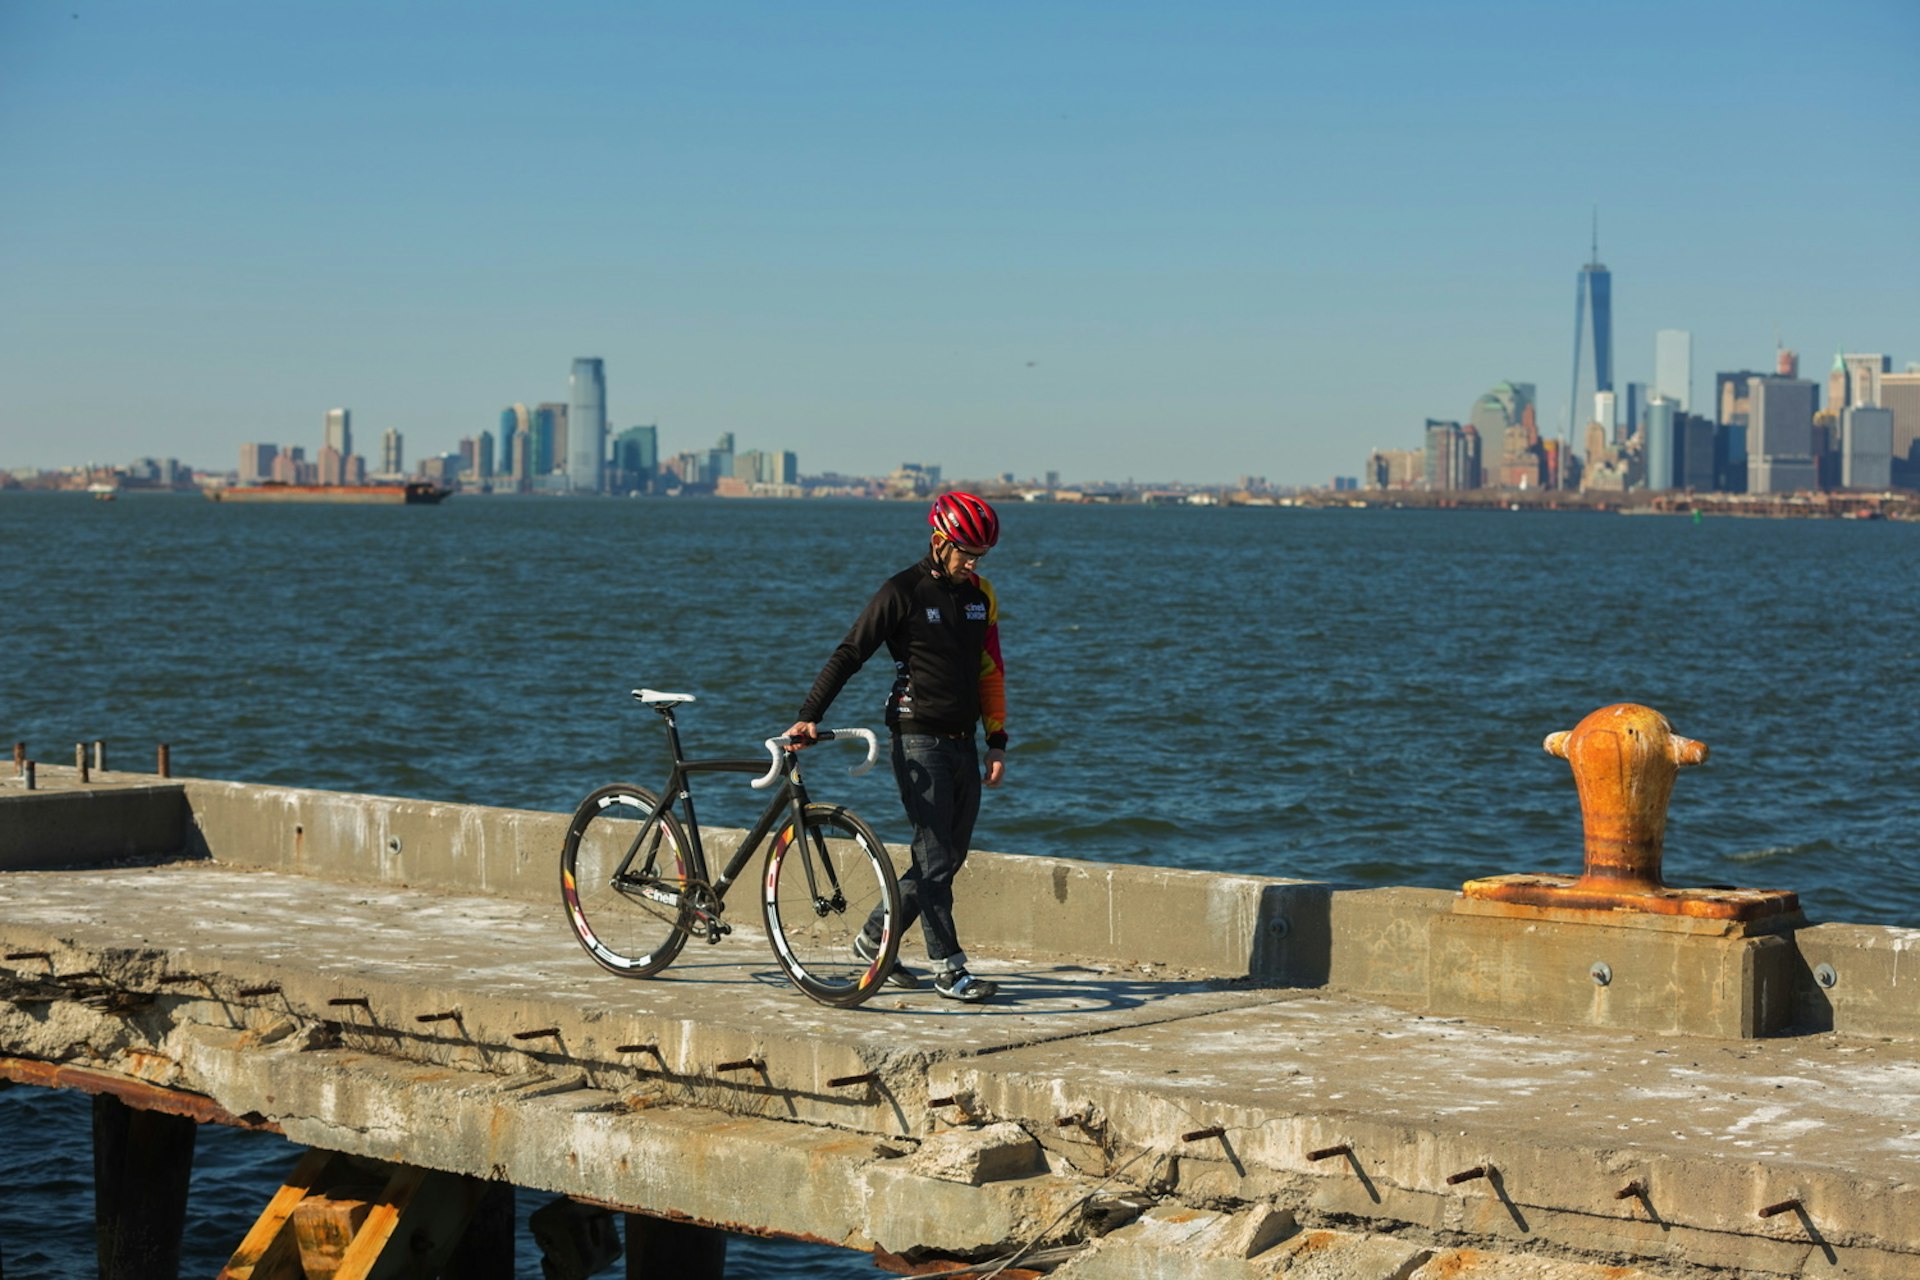 Cycle champion Alfred Bobé Jr. rides his city to escape